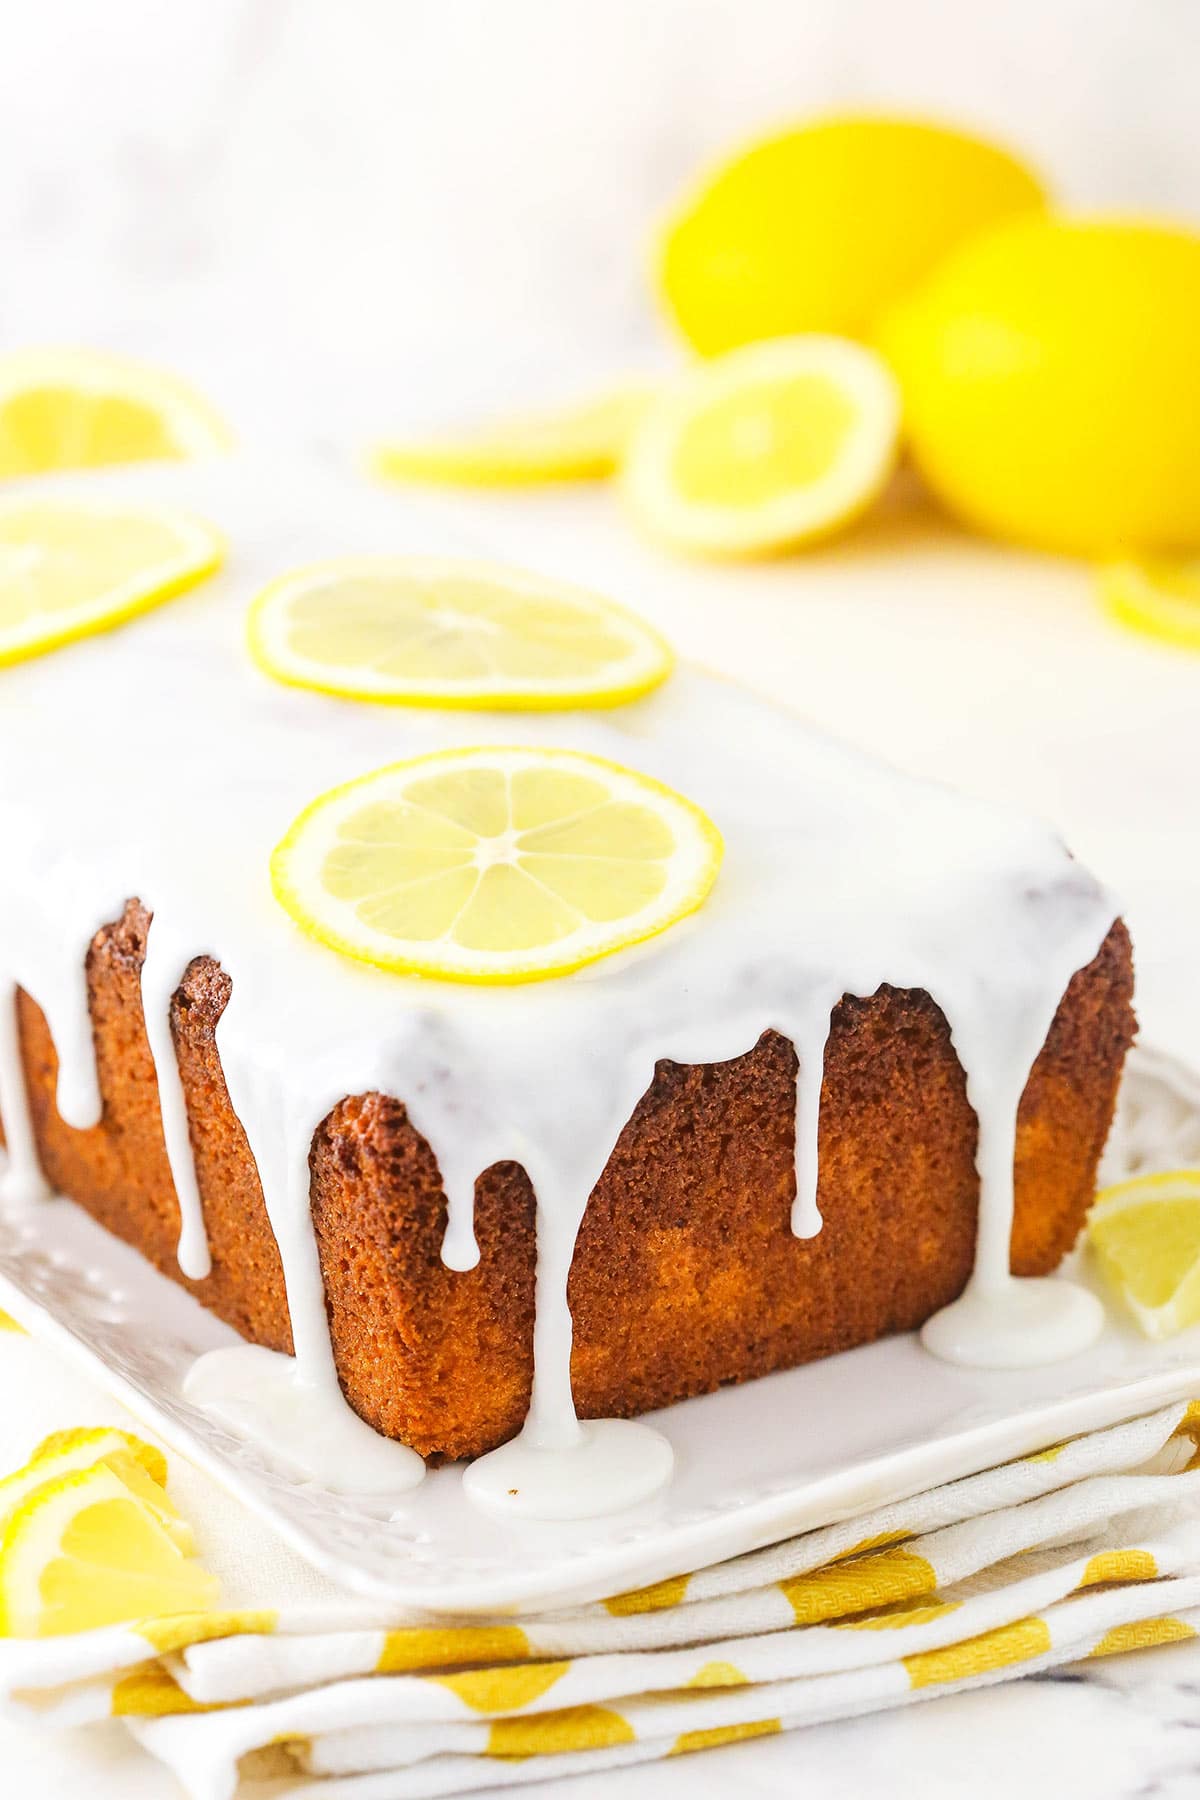 A cooled lemon loaf cake with icing-glaze and thin lemon slices on top